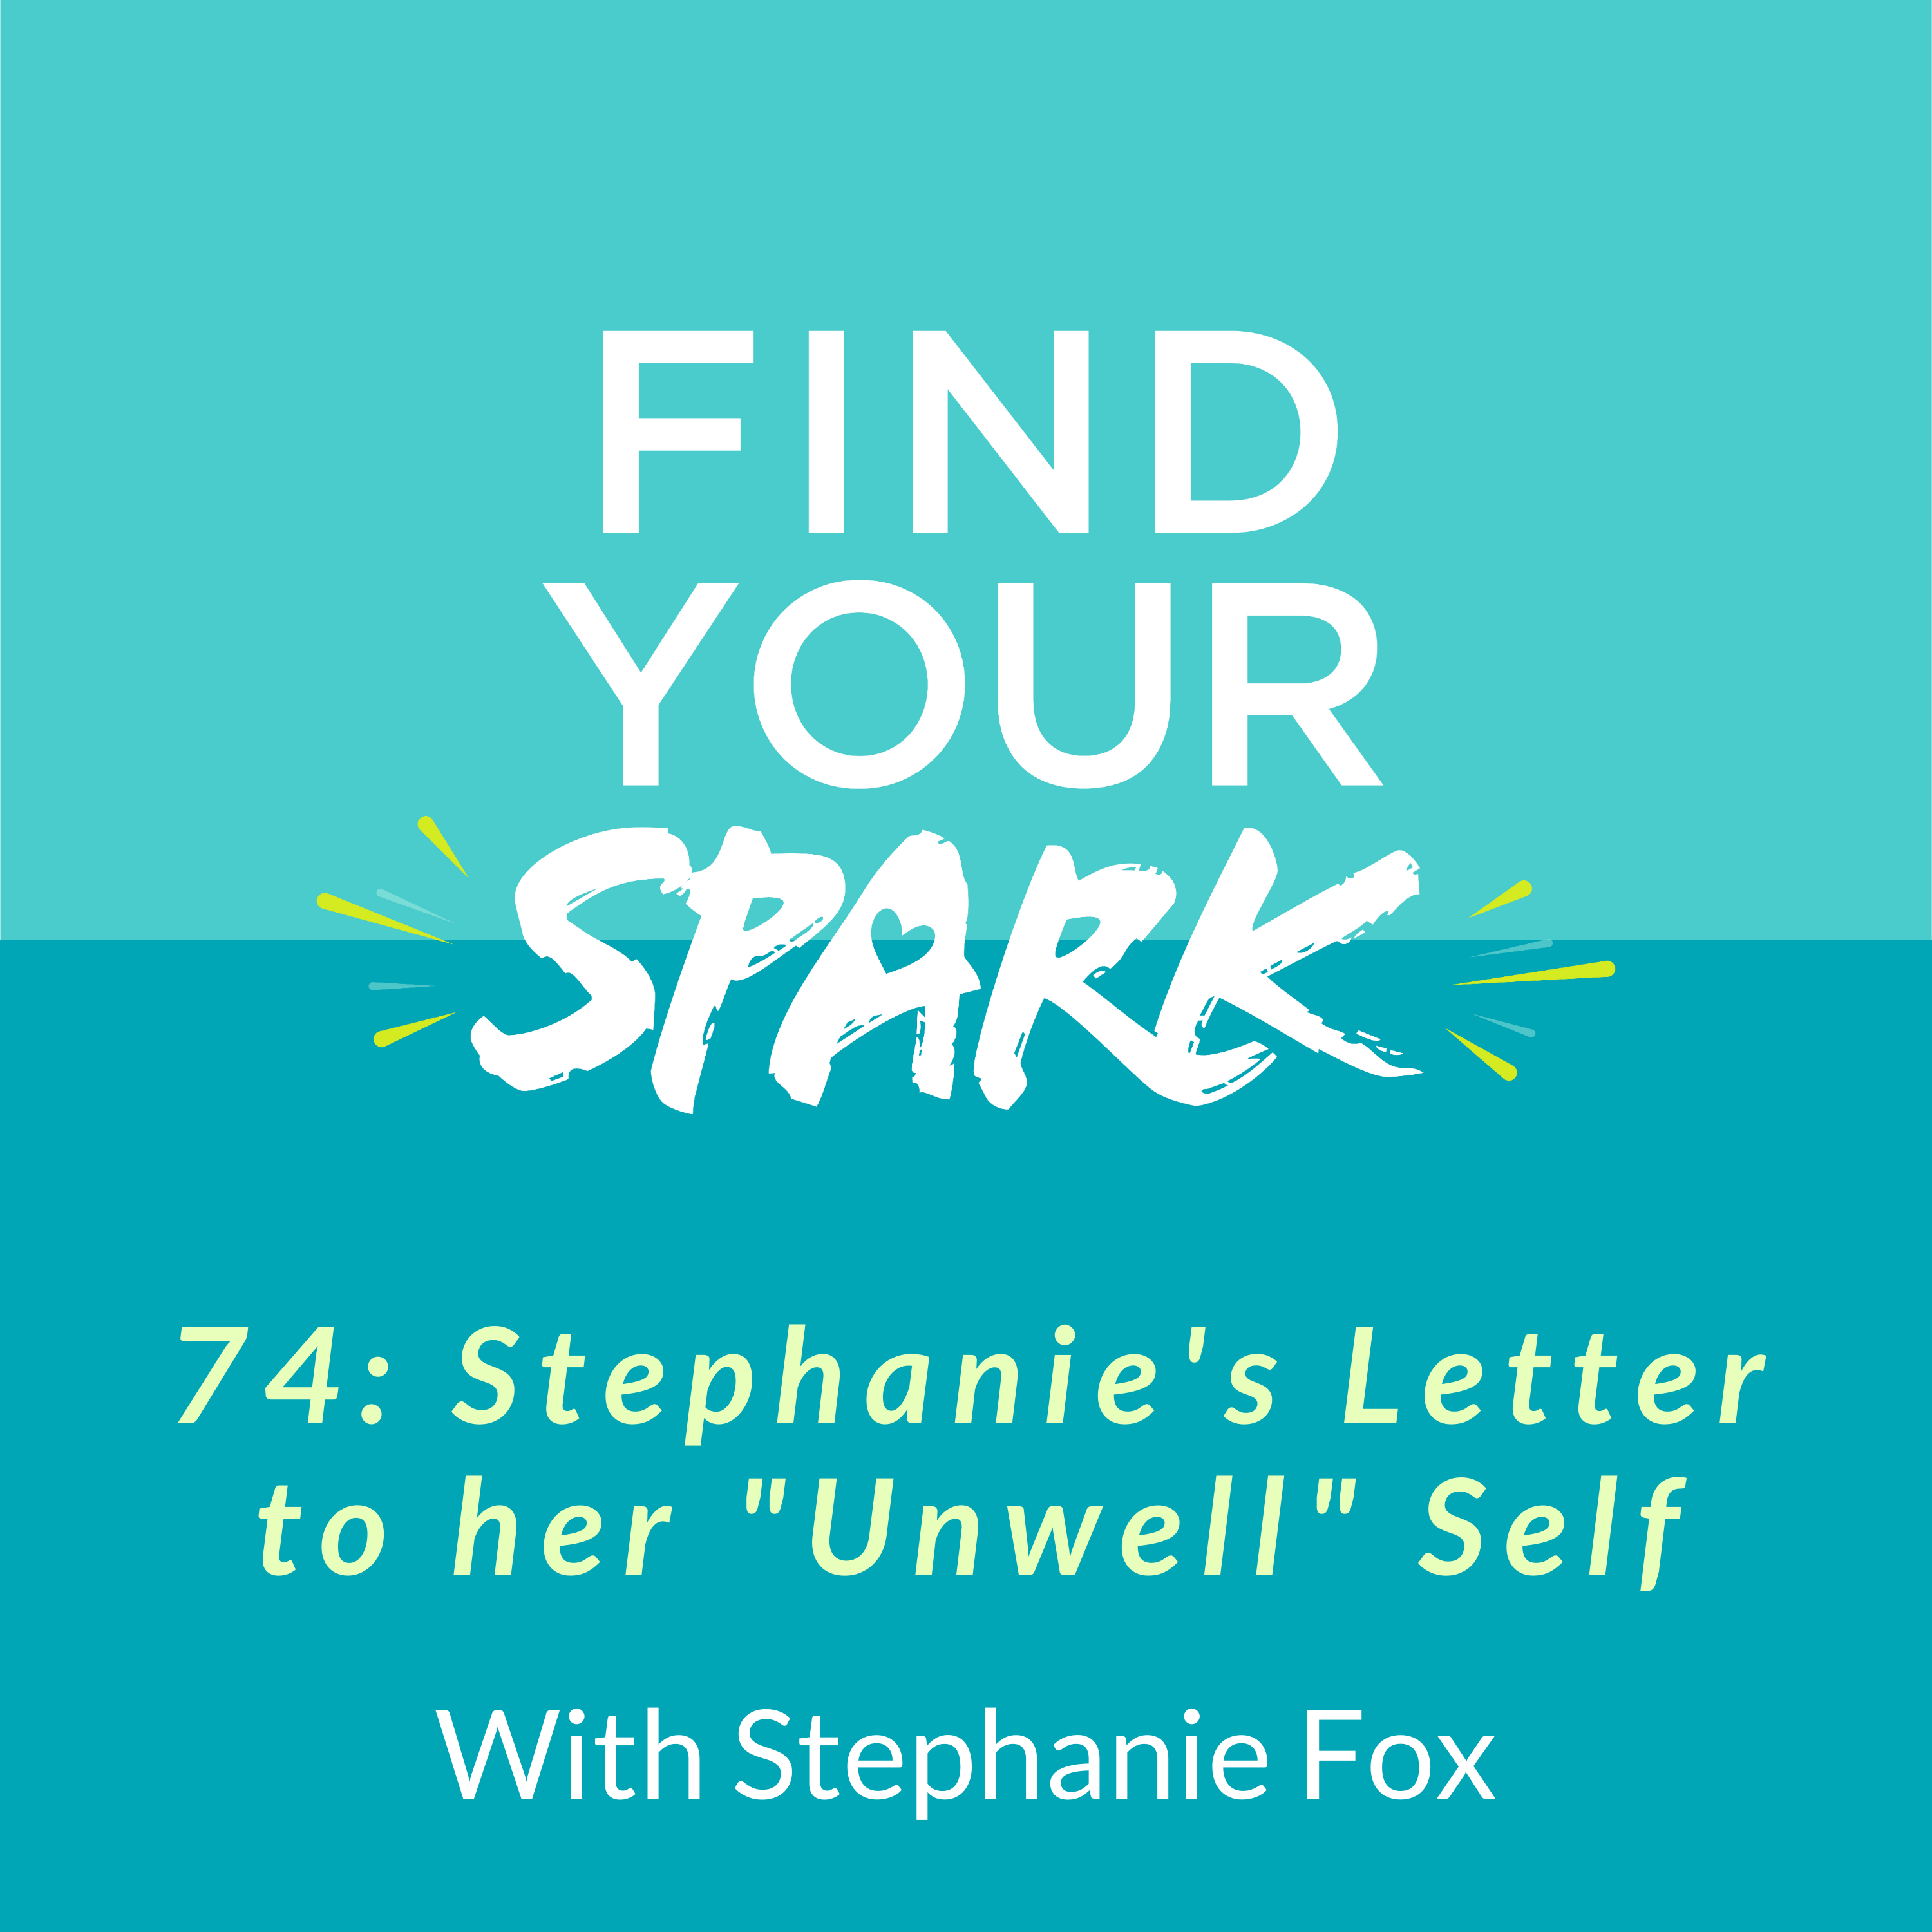 74: Stephanie’s Letter to her “Unwell” Self